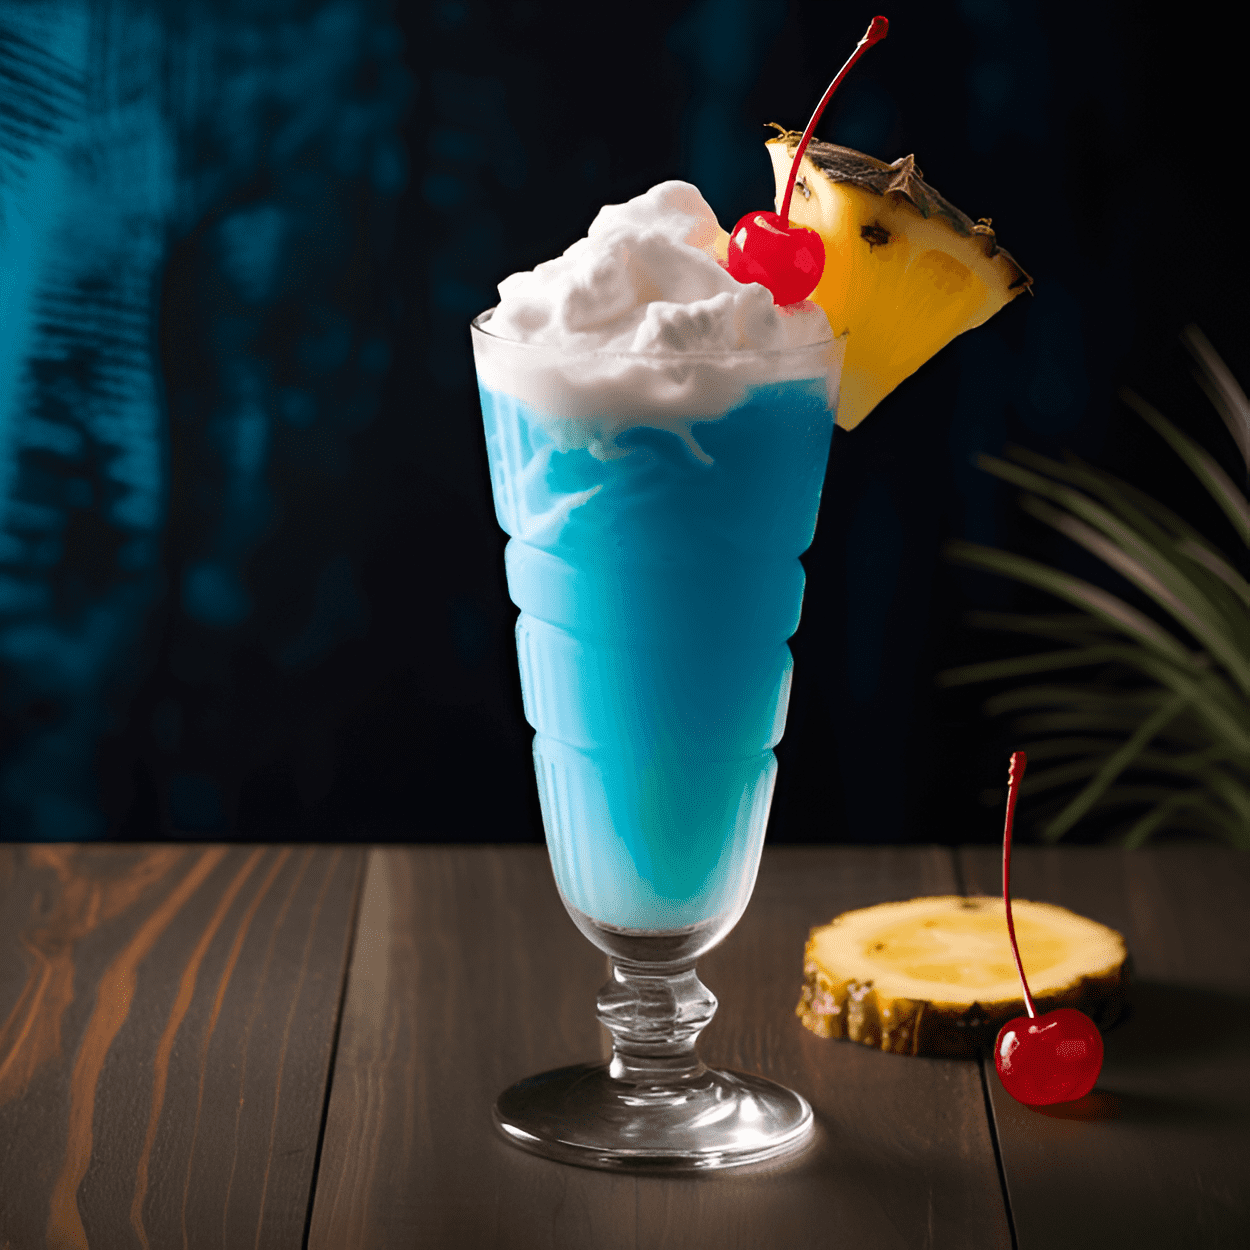 Bubble Bath Cocktail Recipe - The Bubble Bath cocktail has a sweet, fruity taste with a hint of tartness. The combination of pineapple juice, coconut rum, and blue curaçao gives it a tropical flavor, while the cream adds a smooth, velvety texture. The frothy top layer adds a fun, playful element to the drink.